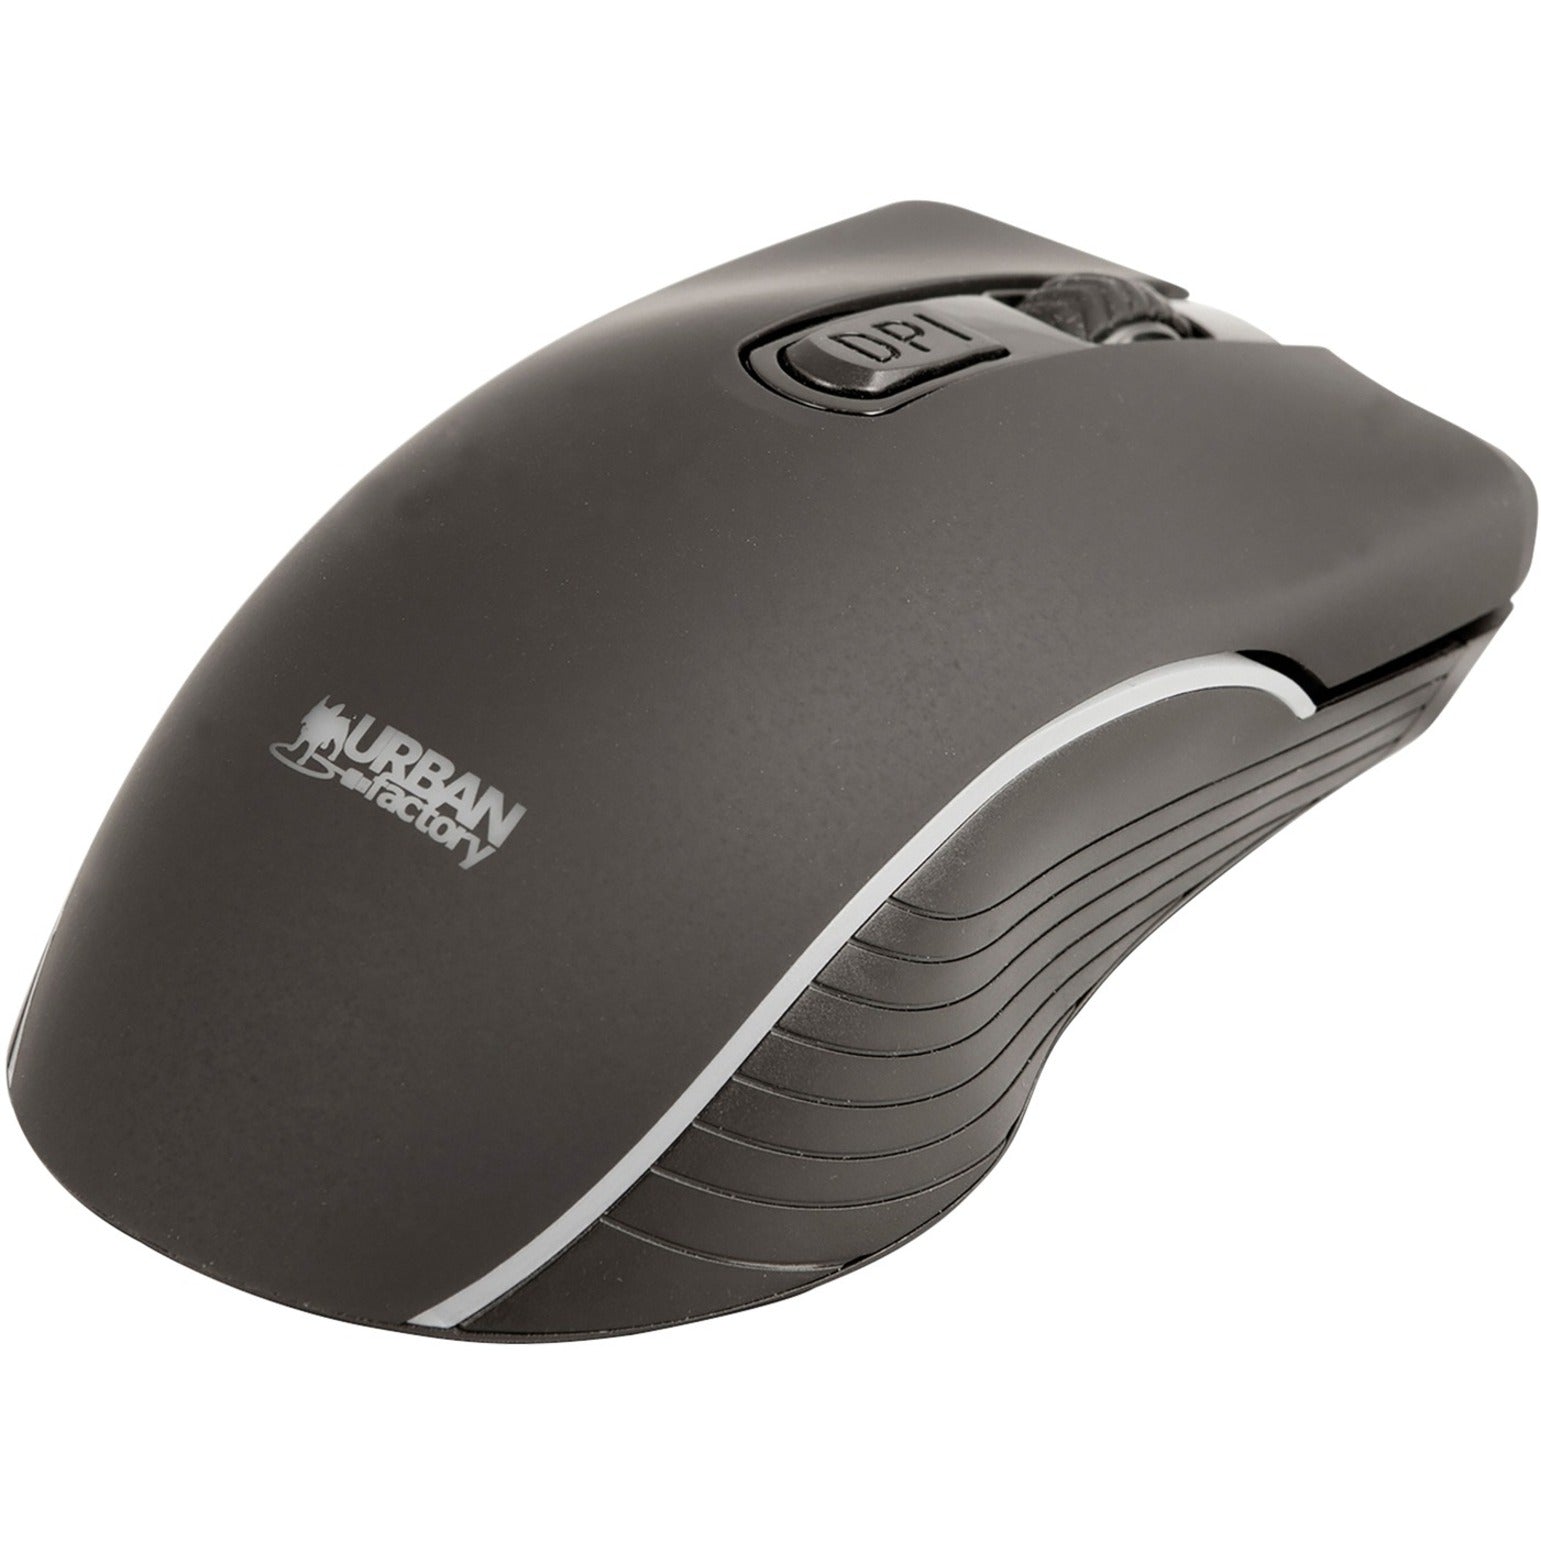 Urban Factory BTM05UF ONLEE Bluetooth 2.4 GHz Ambidextrous Mouse With Rechargeable Battery, Built-in Battery, 2400 DPI, 6 Buttons